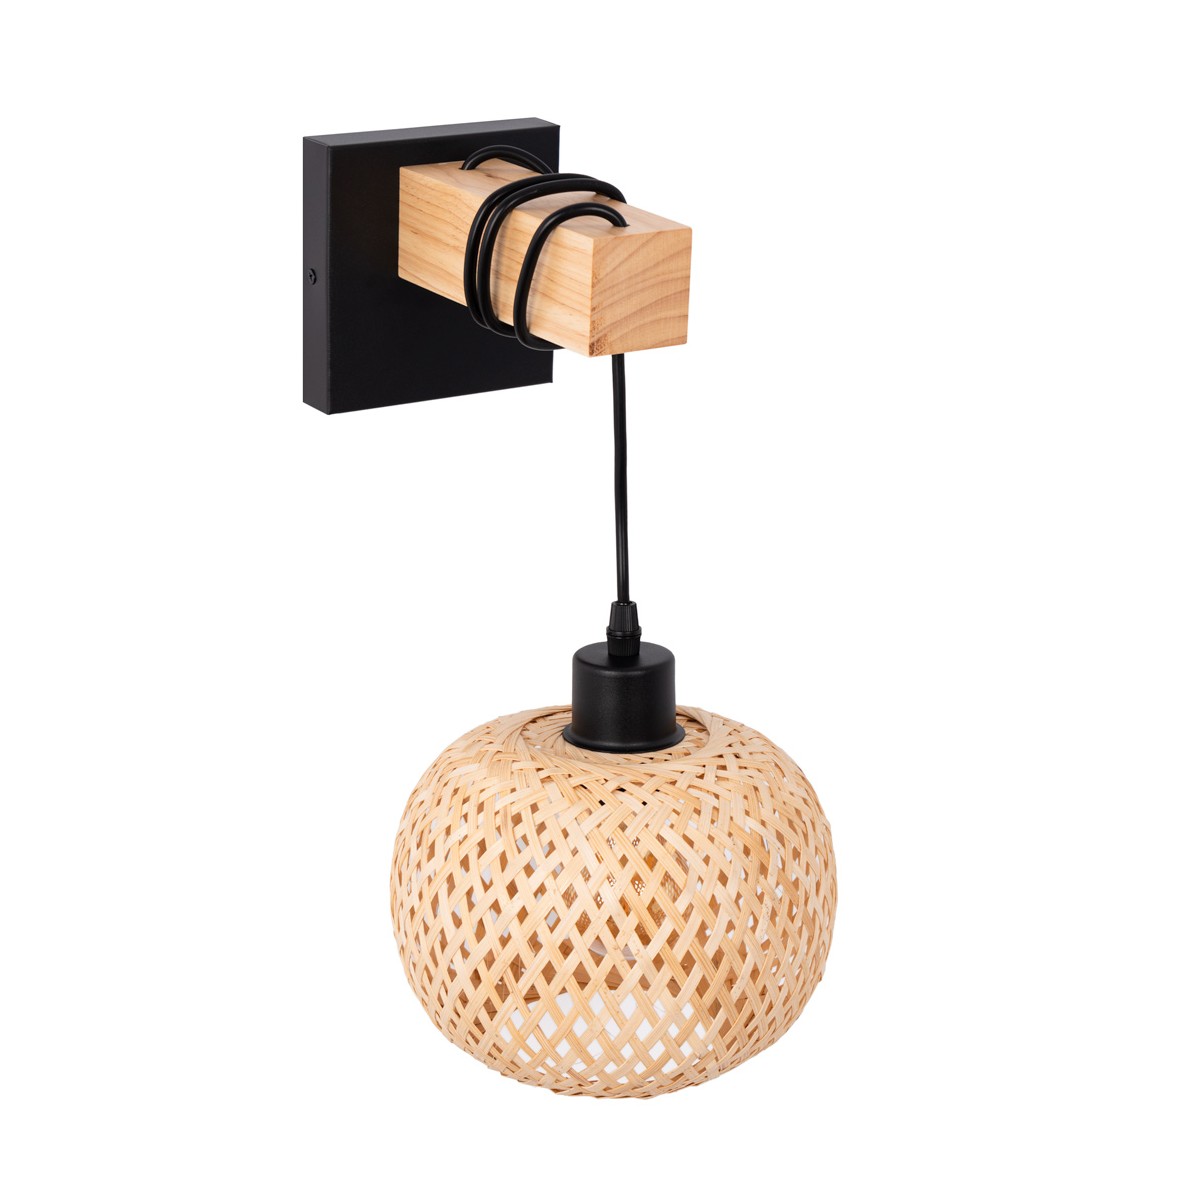 Wall lamp wood and wicker "Shelley" with plug - E27